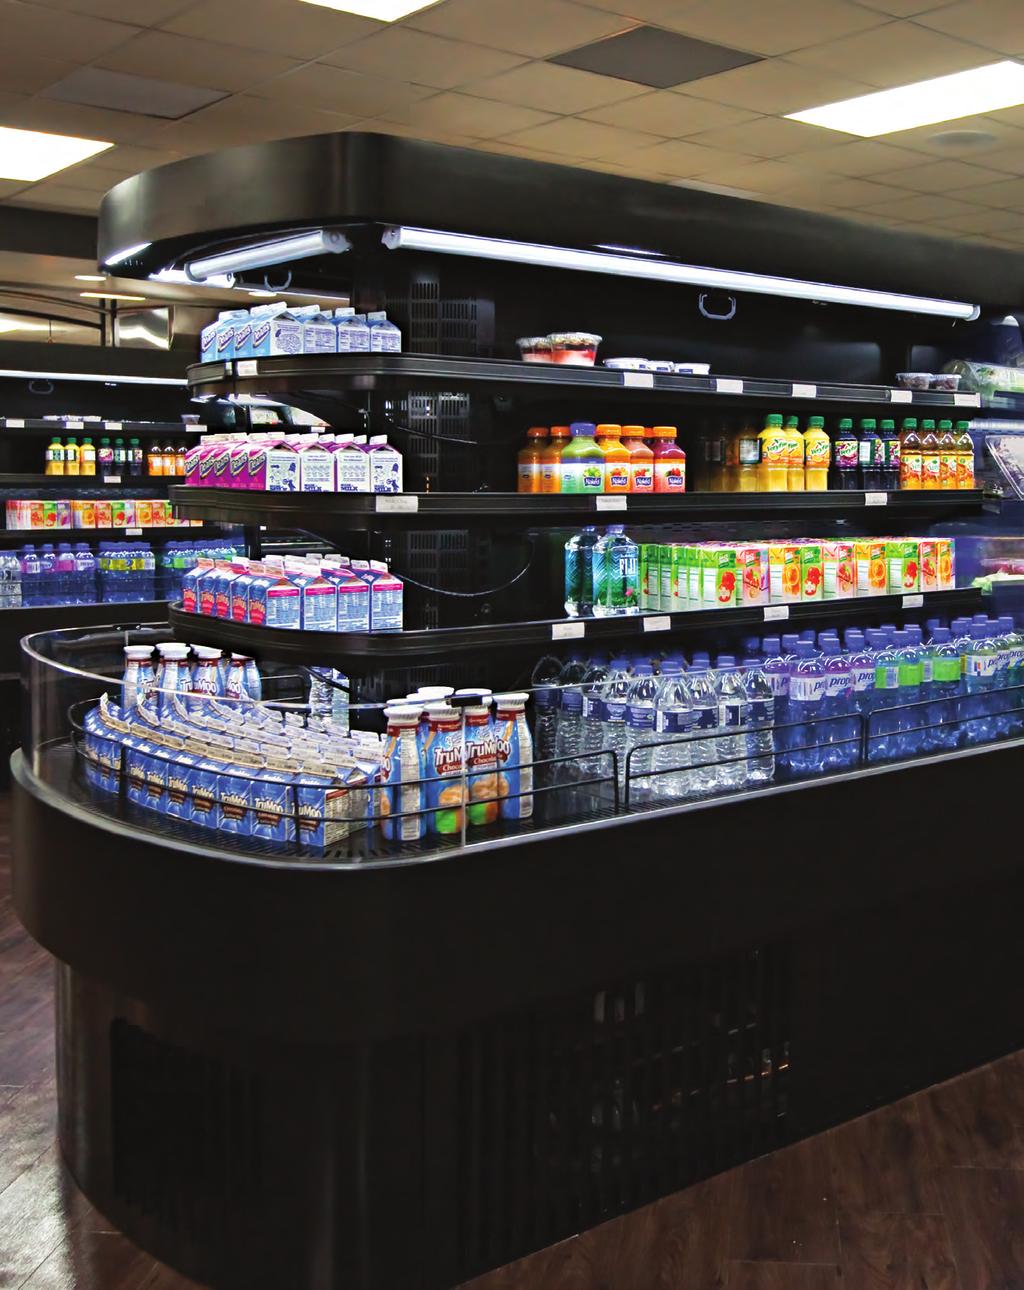 Model Shown: Oasis FSE663R Refrigerated Self-Service End Cap (see p.